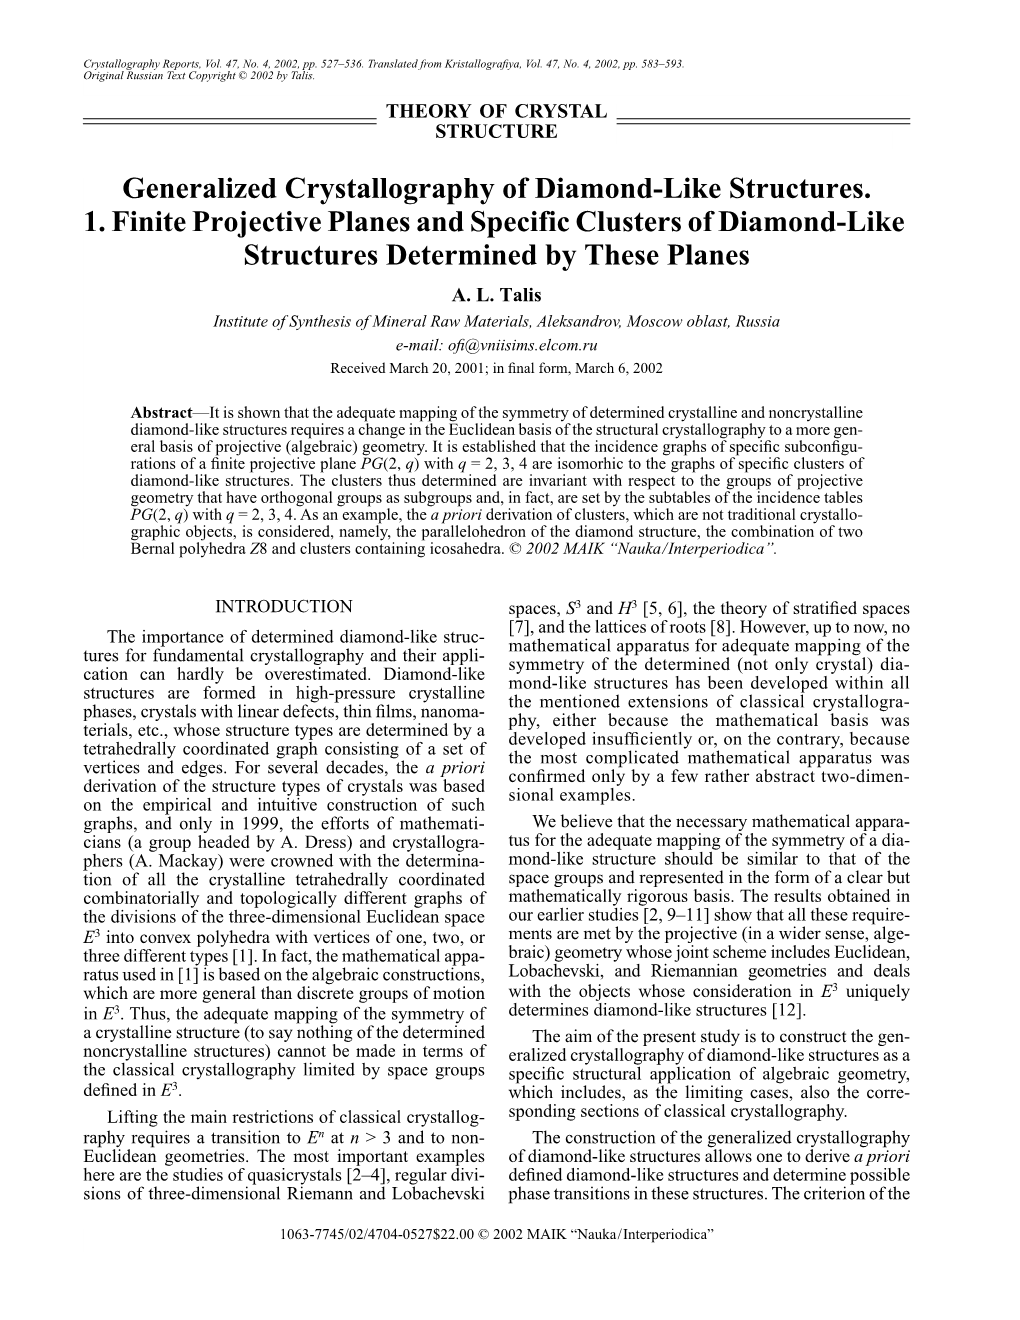 Generalized Crystallography of Diamond-Like Structures. 1. Finite Projective Planes and Specific Clusters of Diamond-Like Structures Determined by These Planes A